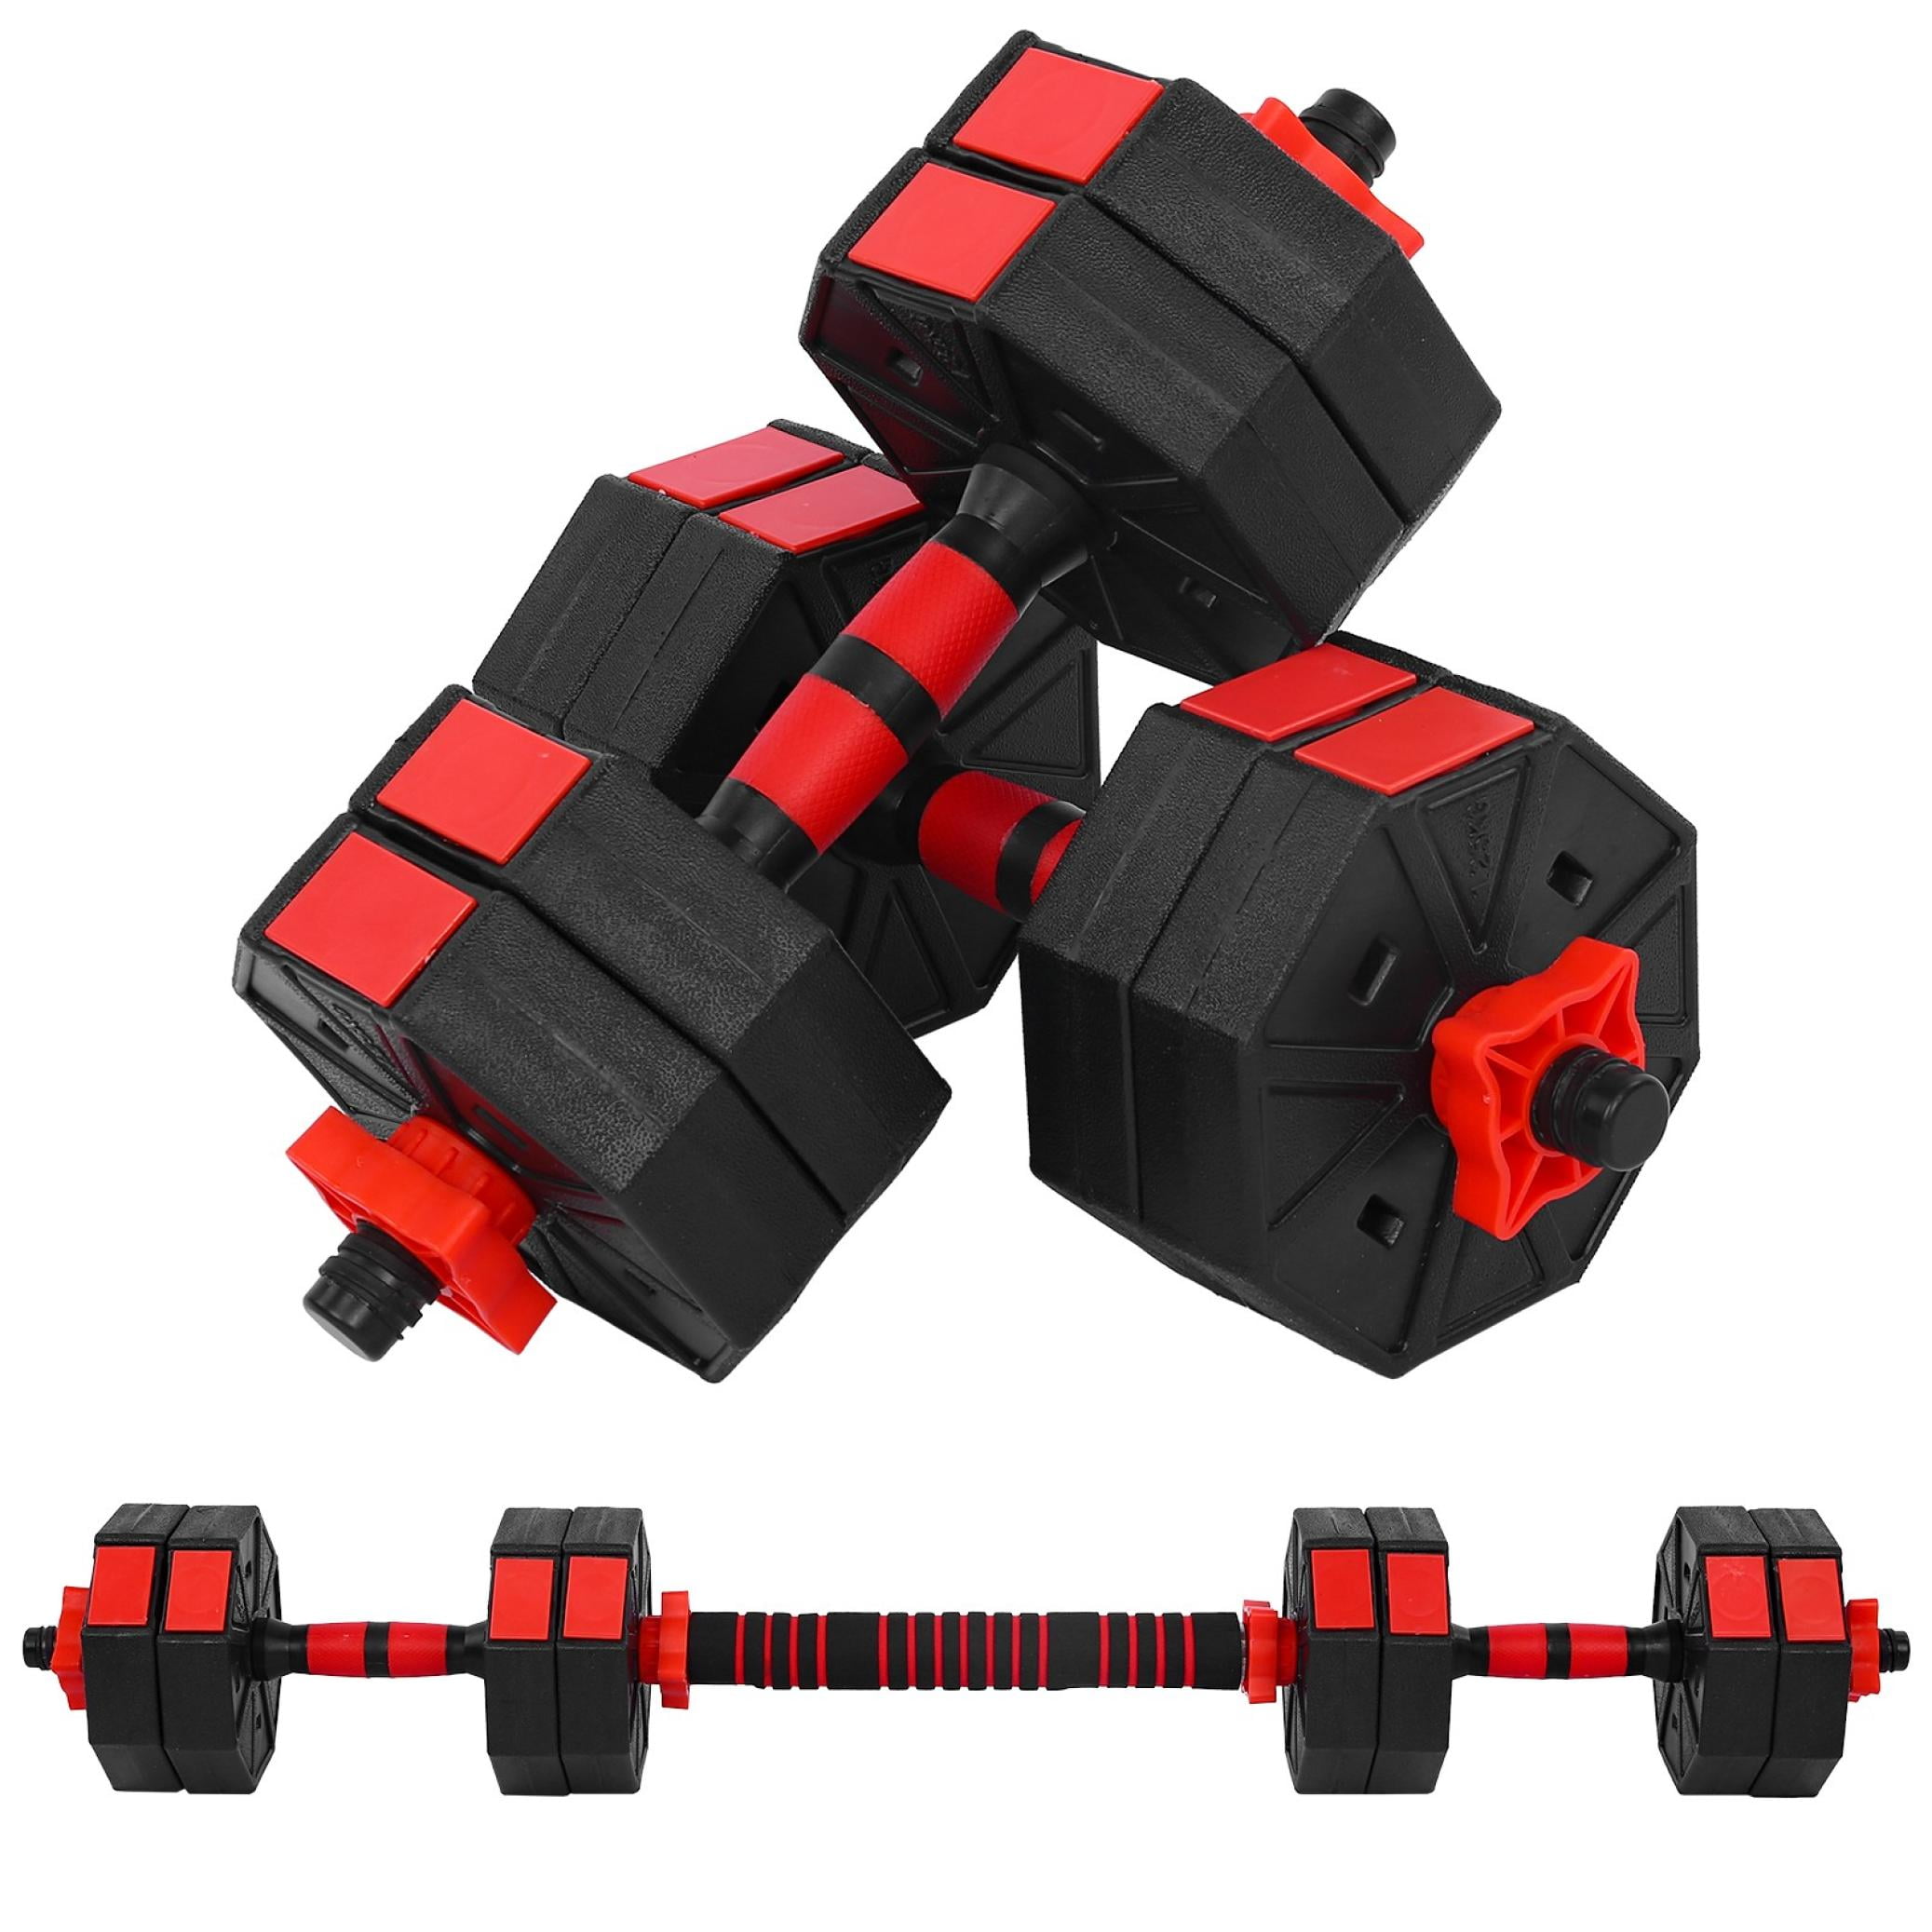 Totall 66/88/110LB Weight Dumbbell Set Adjustable Gym Barbell Plate Body Workout 